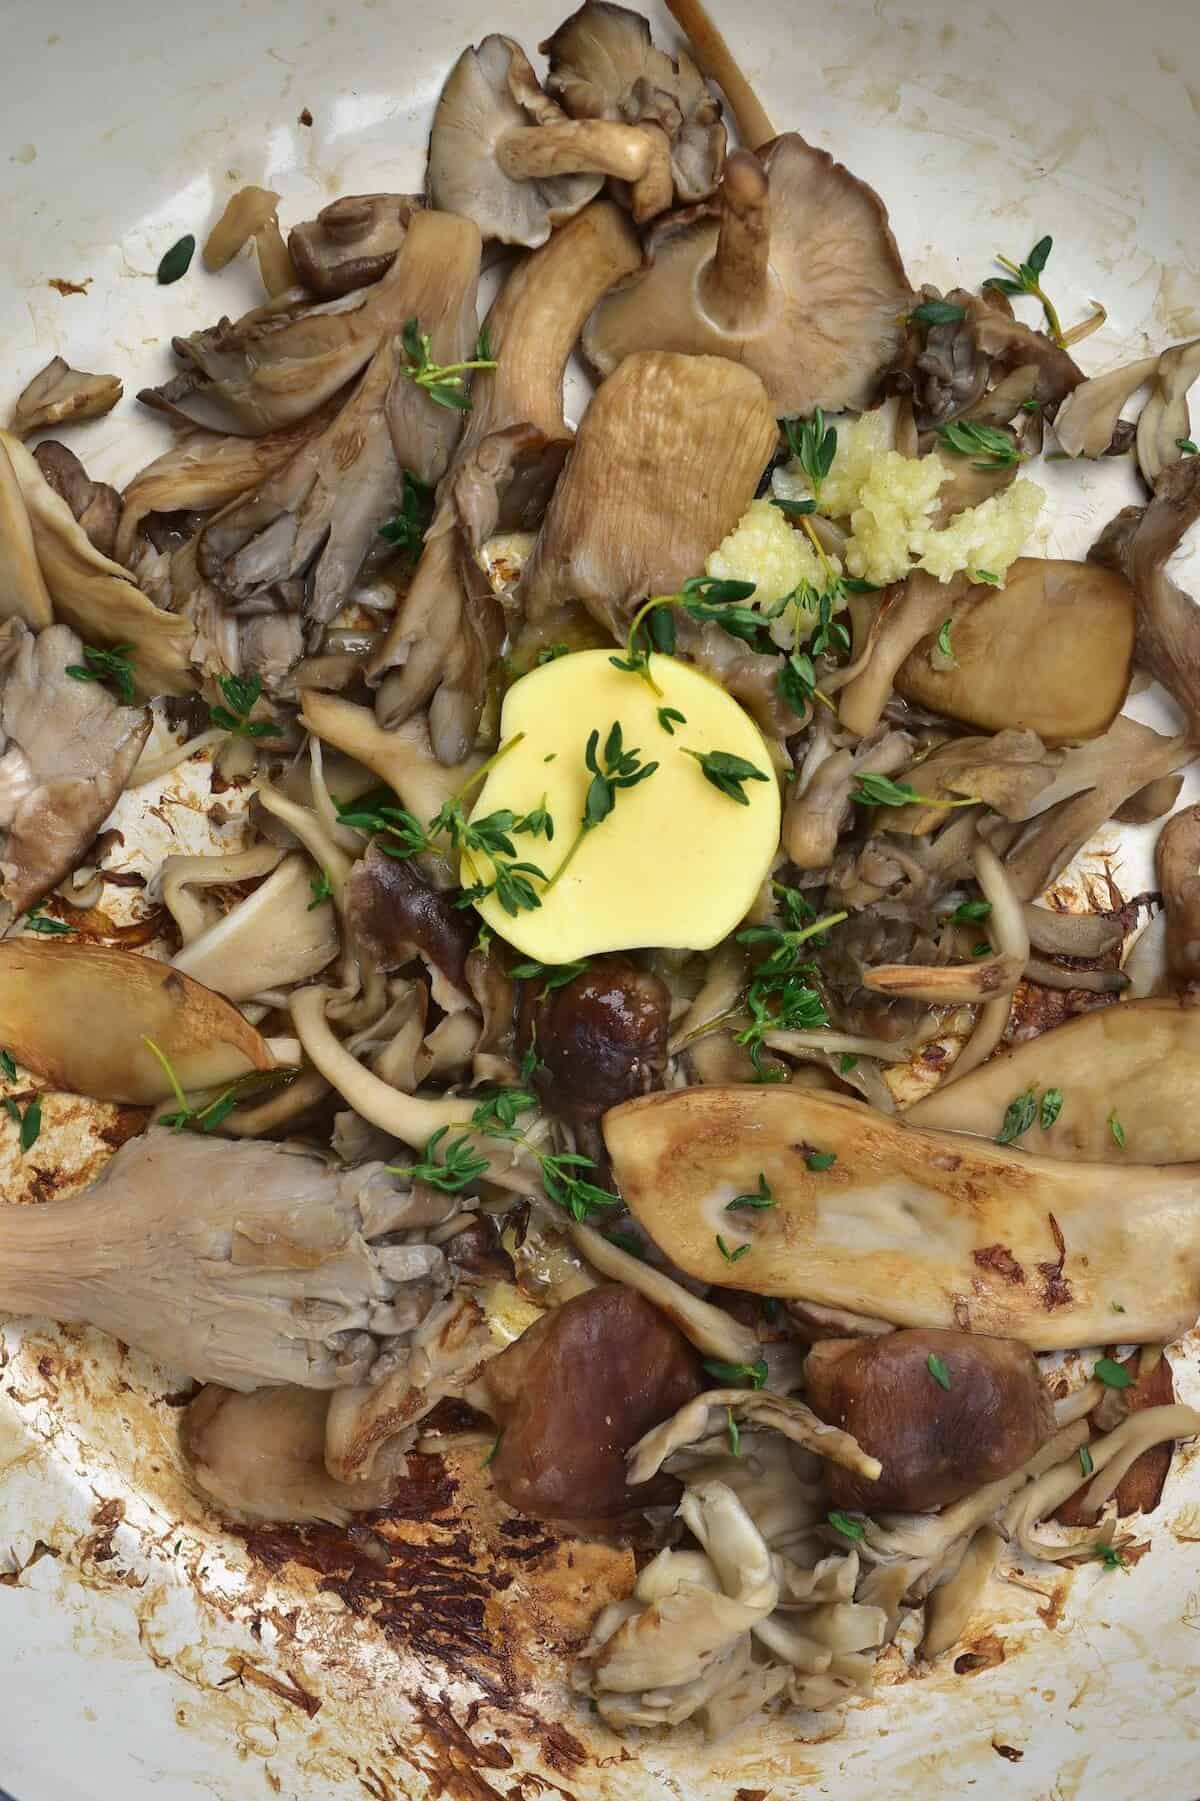 Adding butter and herbs to cooking mushrooms